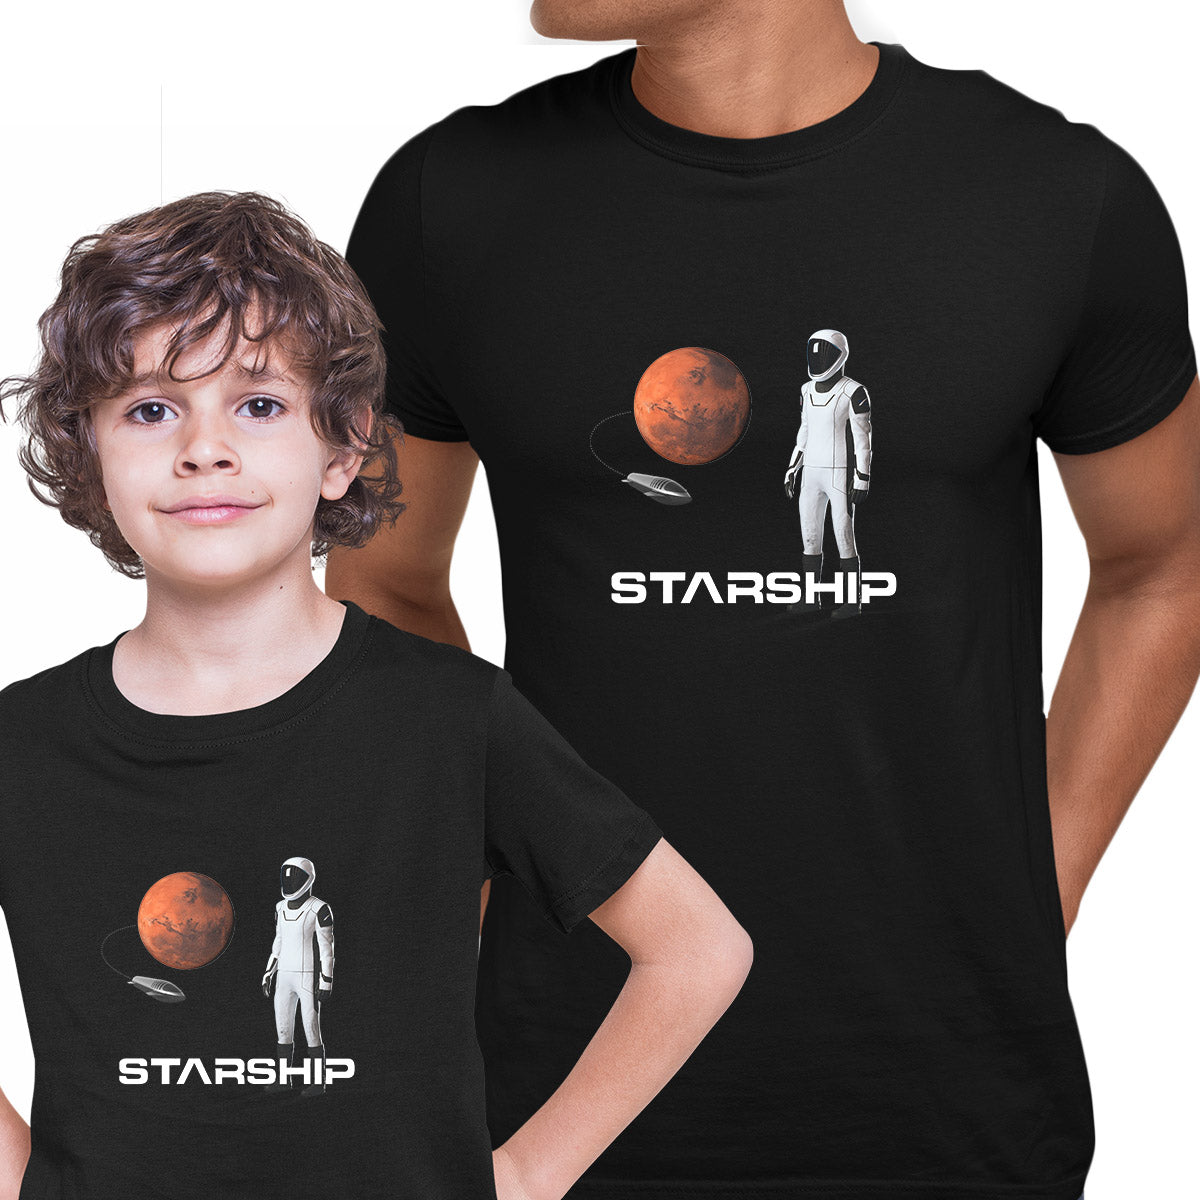 Ooze Sydøst vedhæng Starship SpaceX Human Astronaut Mars Launch & Land Black T-shirt Scientist  Gift